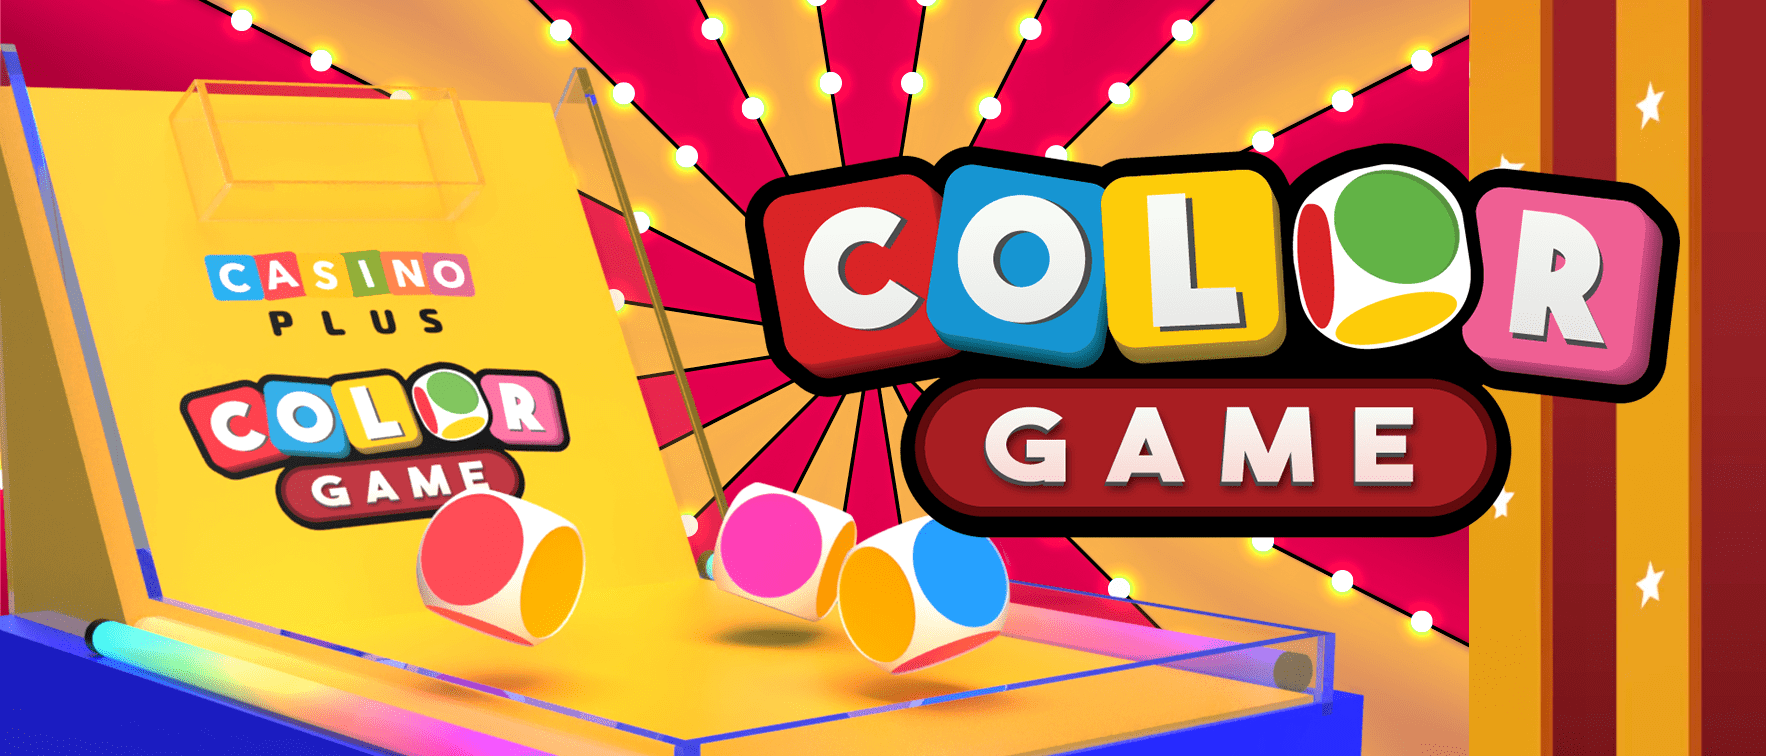 Casino Plus Color Game Betting Odds CG01-24022420 February 24 2024